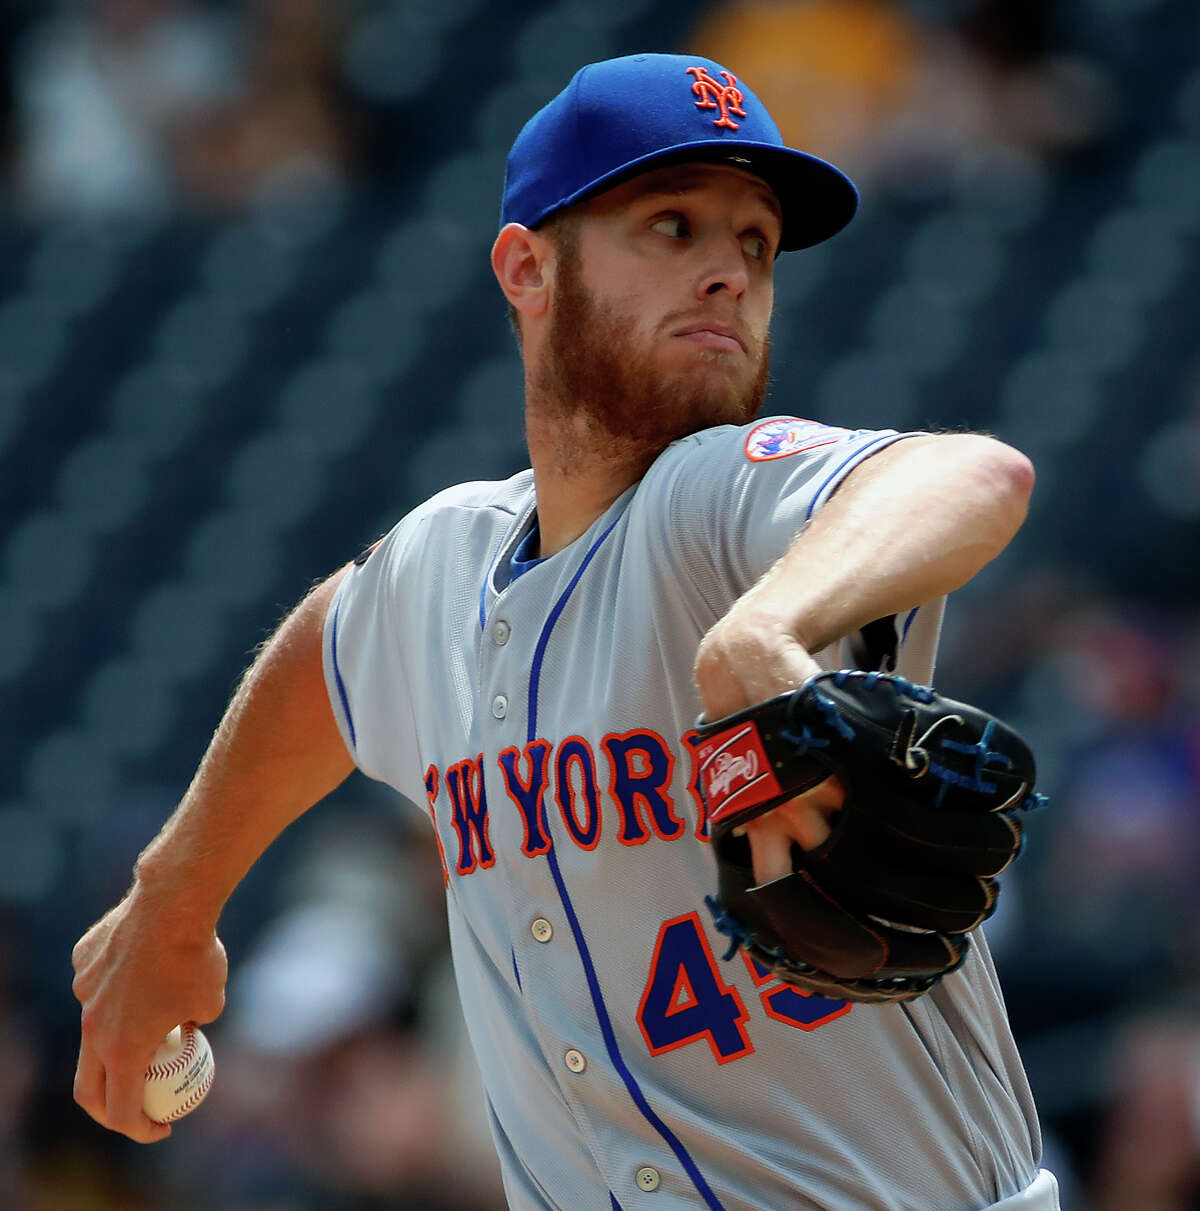 New York Mets starting pitcher Zack Wheeler delivers during the first inning the team's baseball game against the Pittsburgh Pirates in Pittsburgh, Sunday, July 29, 2018. (AP Photo/Gene J. Puskar)